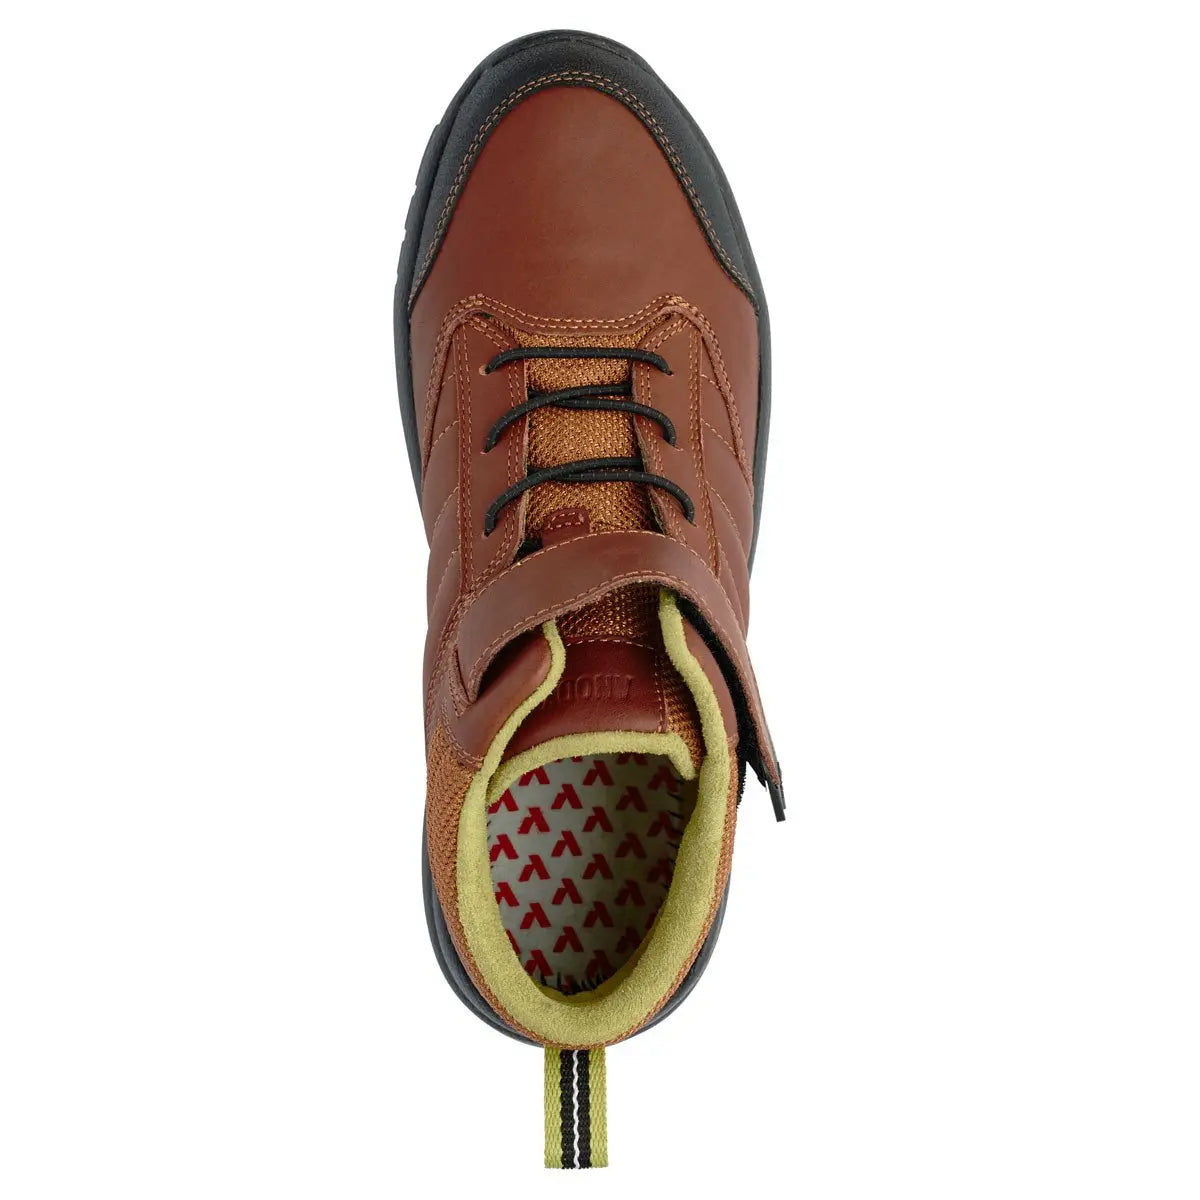 No tie Anodyne No. 55 Trail Boot in Whiskey